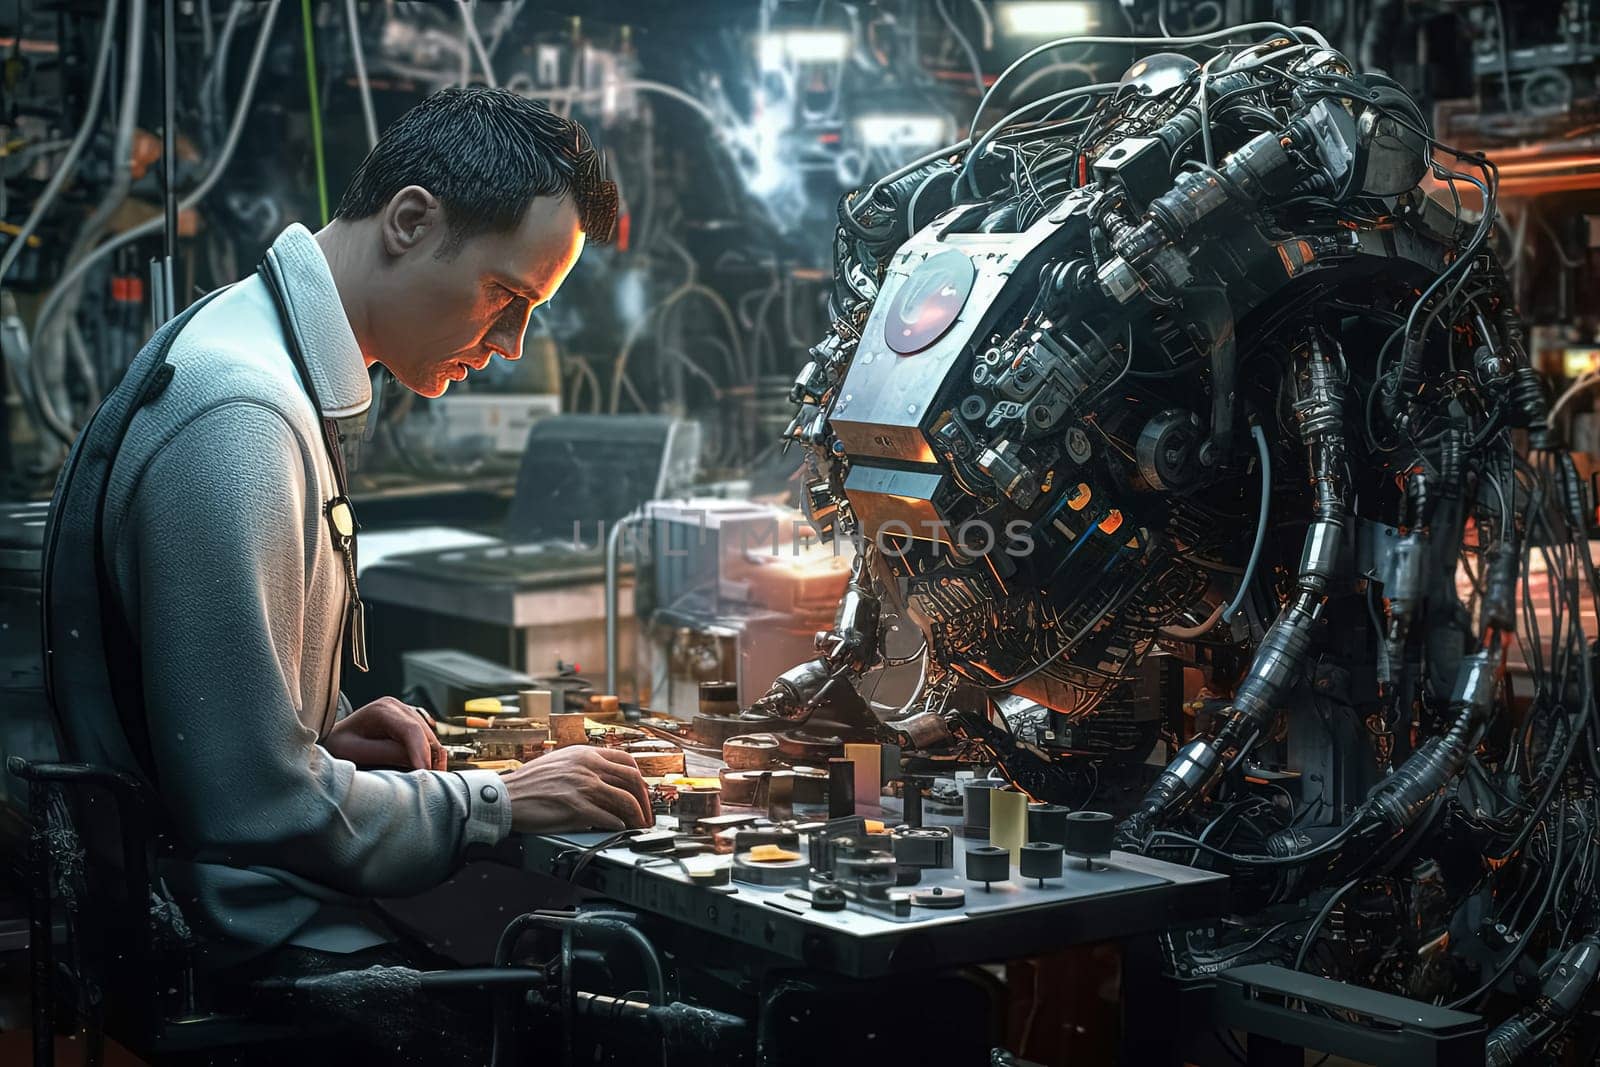 A man is working on a robot in a lab. The robot is made of wires and has a red square on its chest. Scene is futuristic and technological